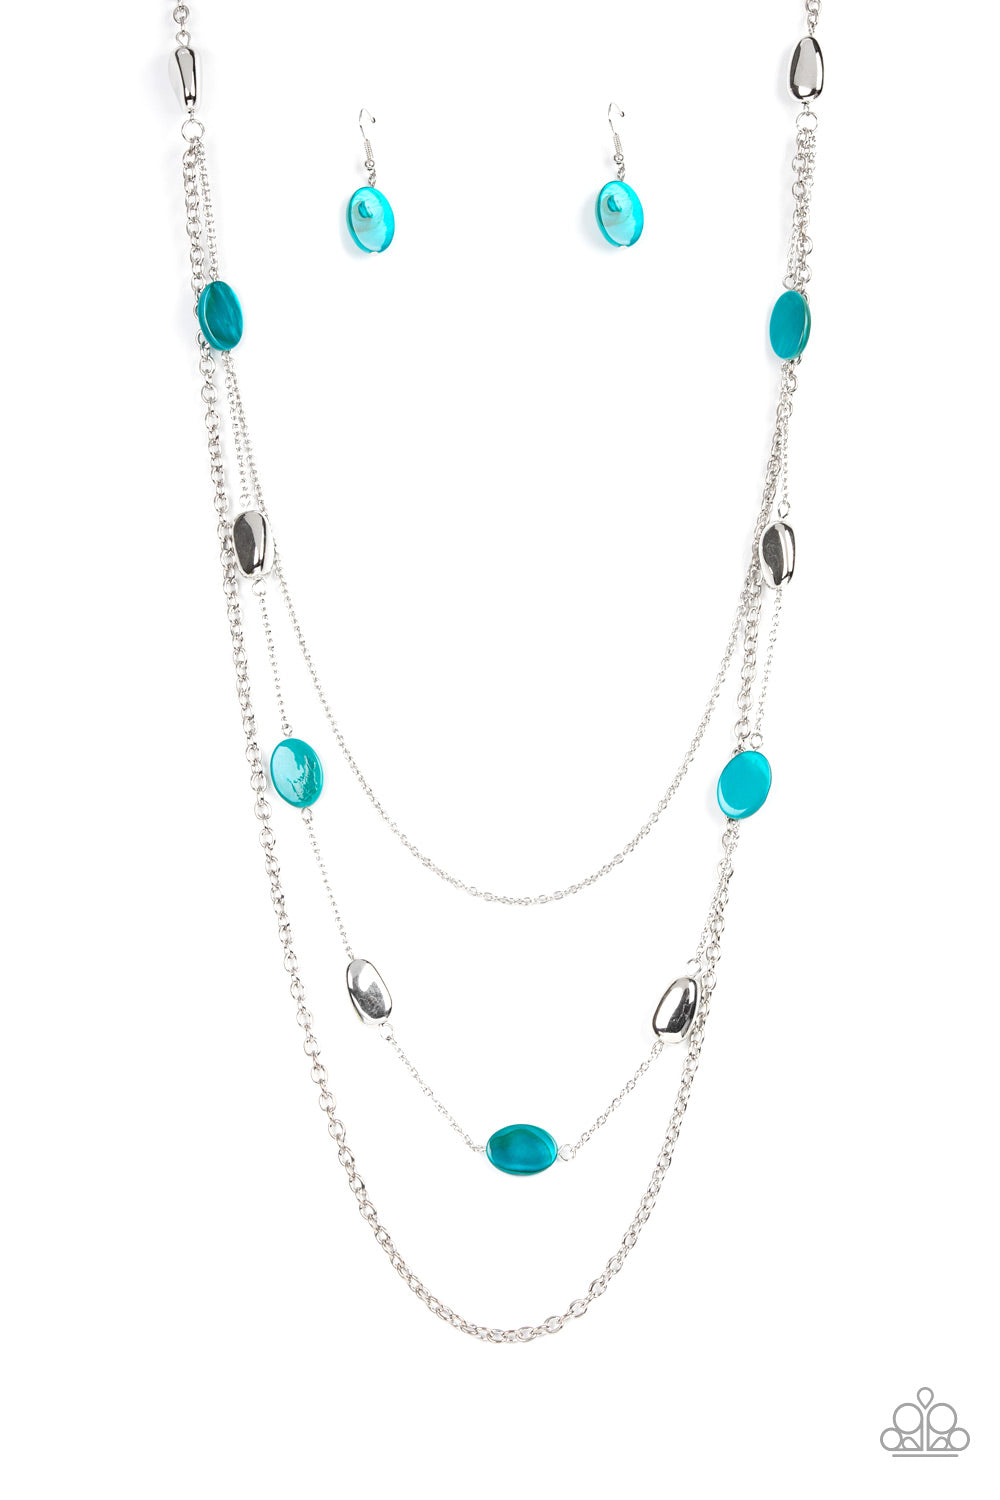 Barefoot and Beachbound - Blue Necklace - Paparazzi Accessories